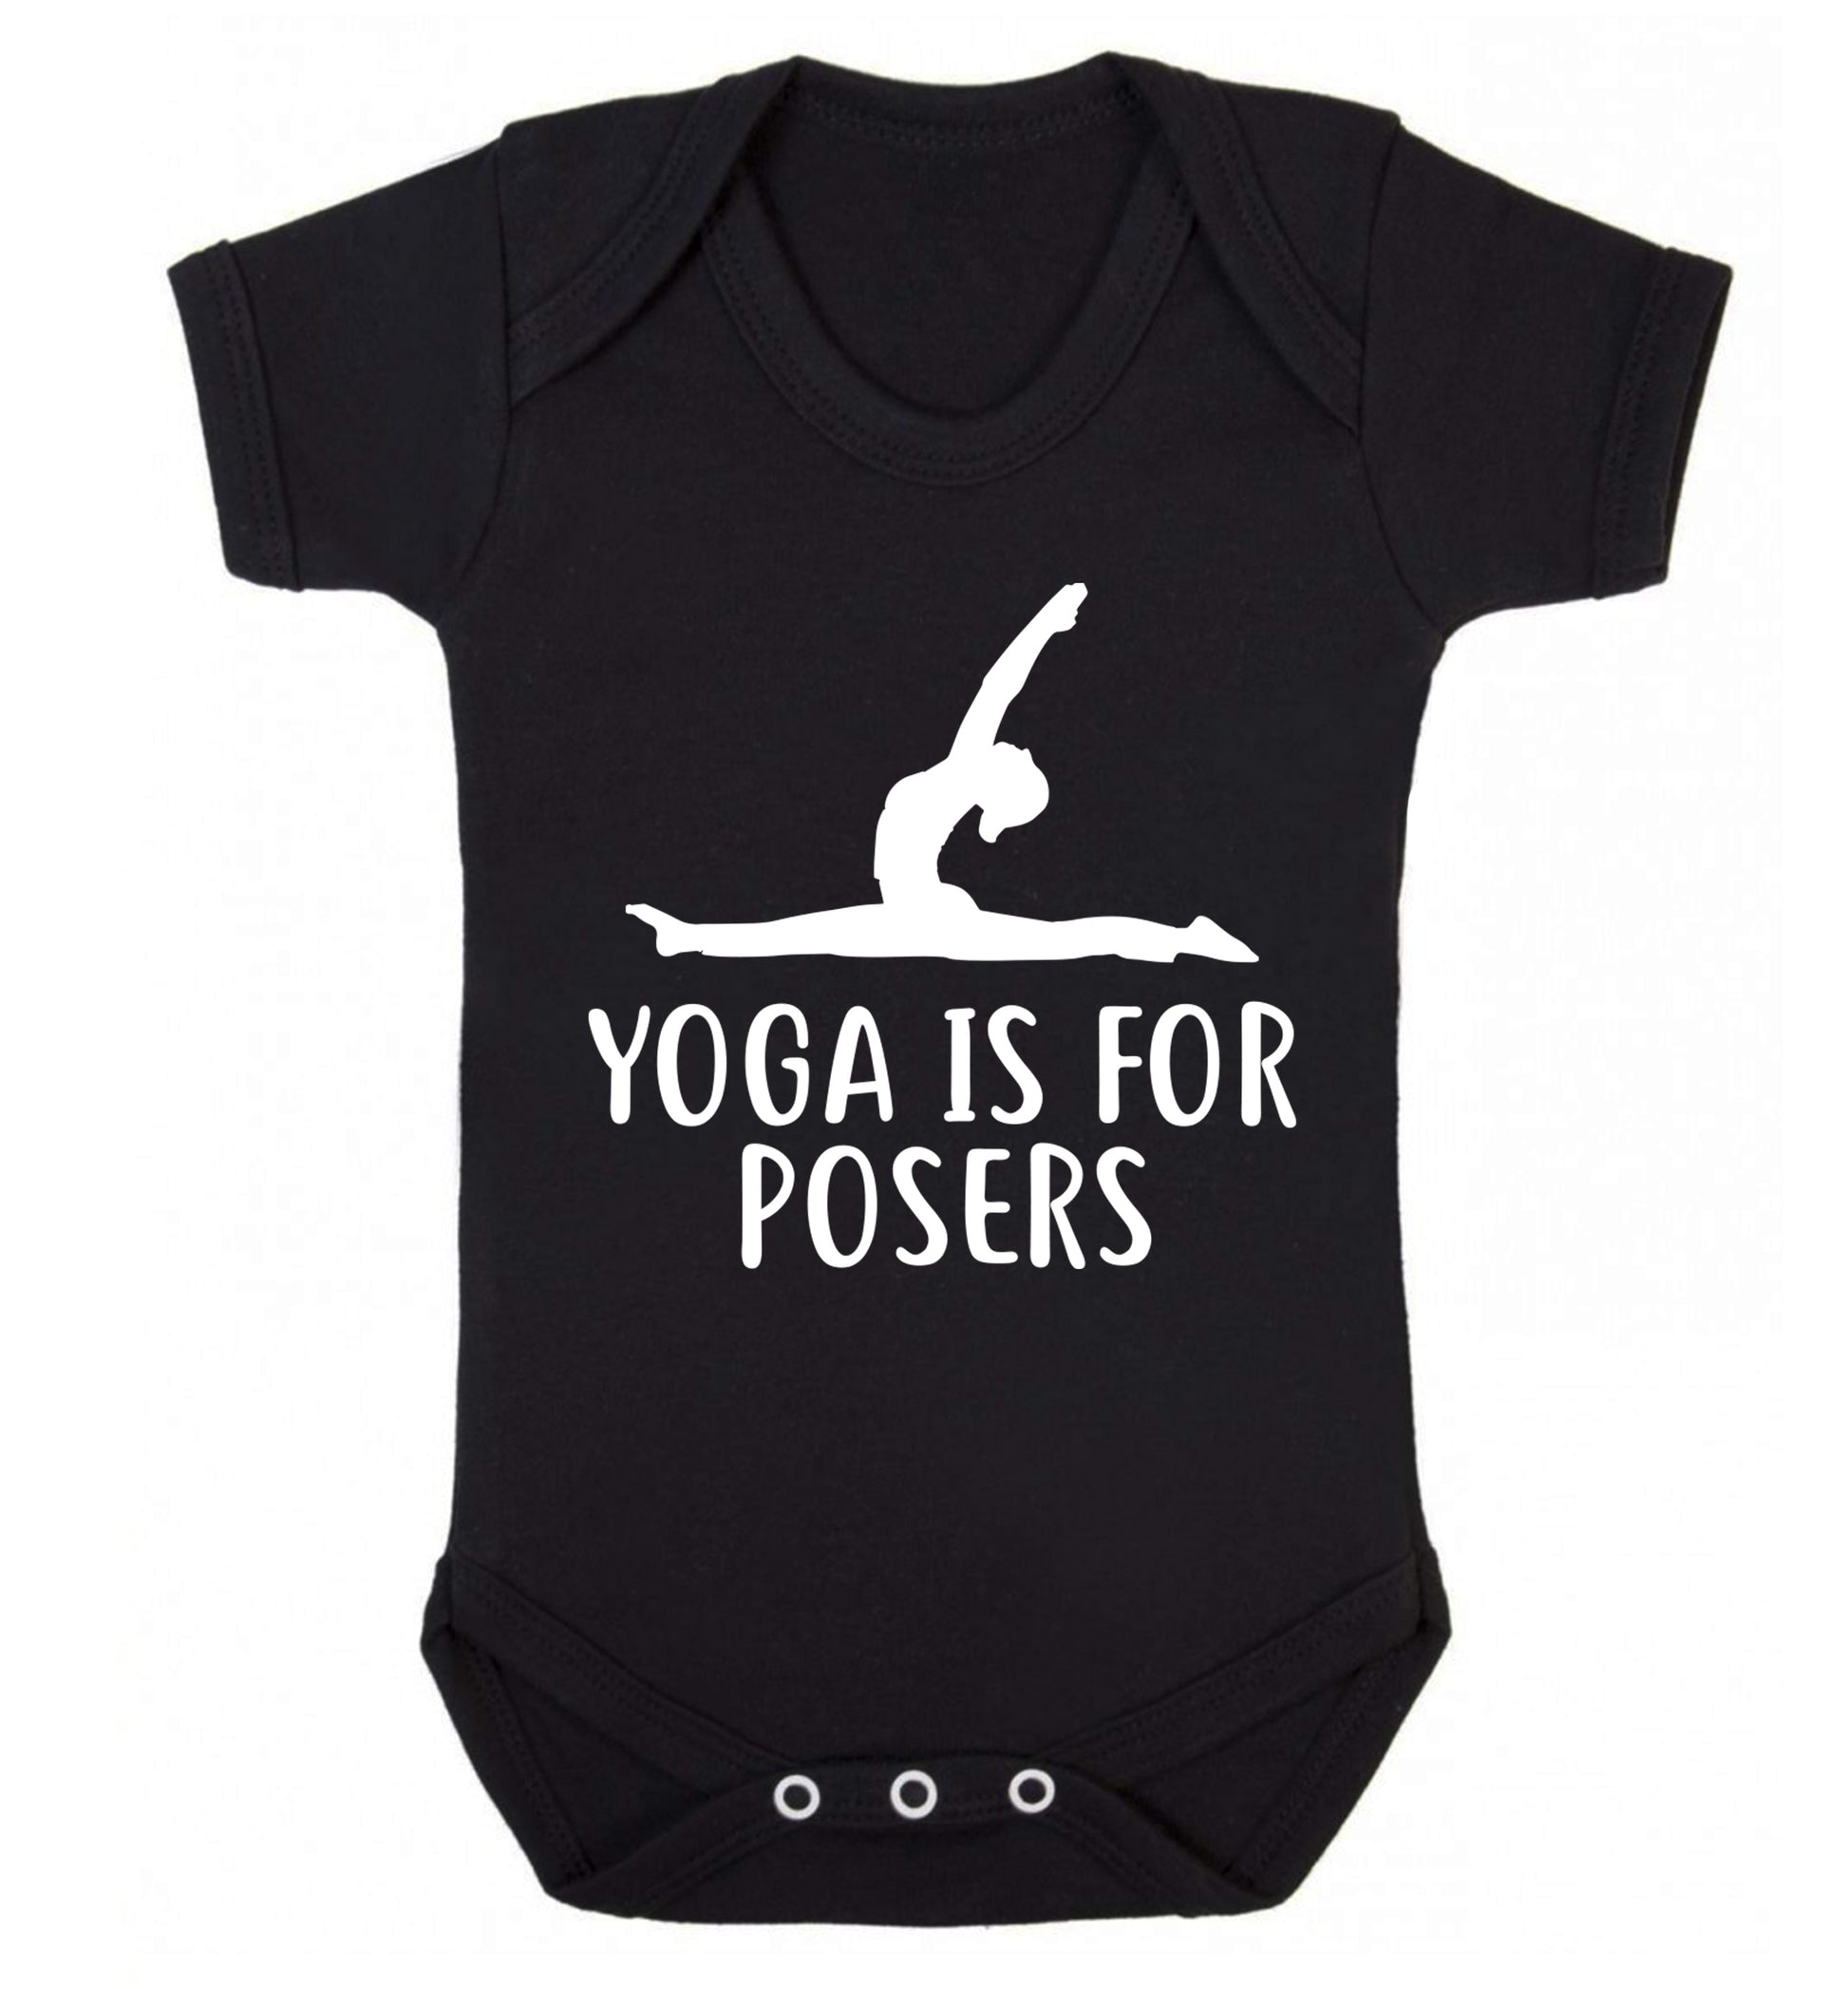 Yoga is for posers Baby Vest black 18-24 months